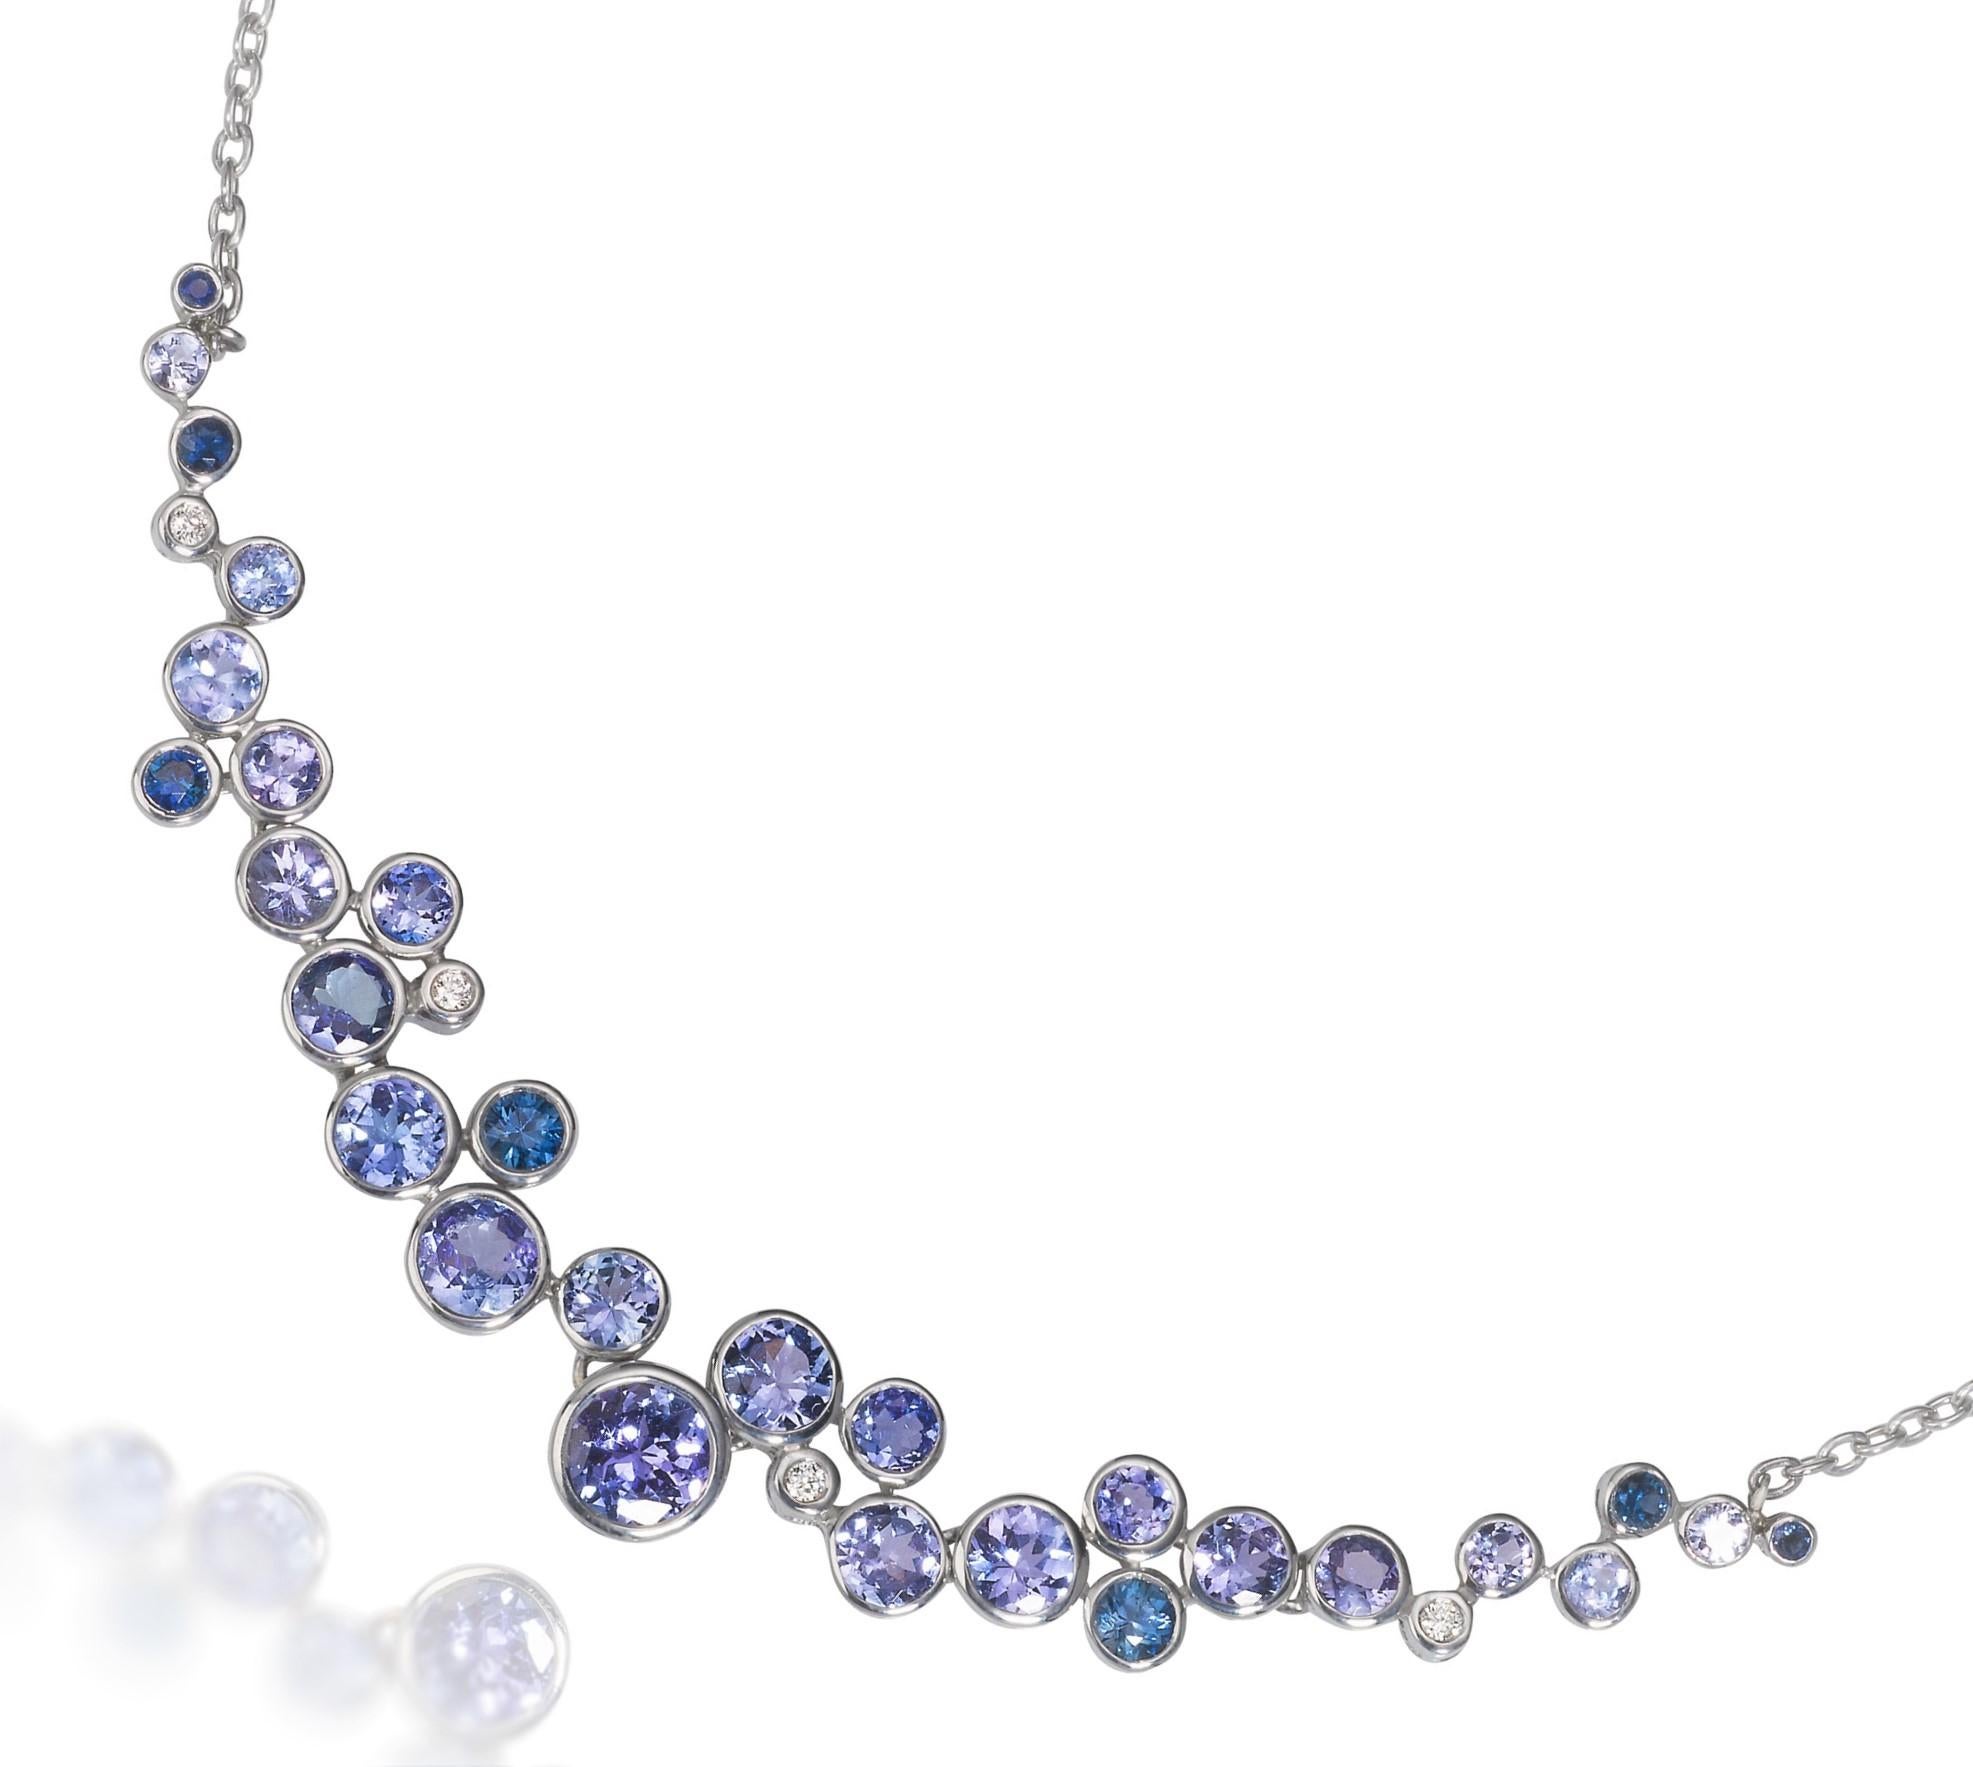 Contemporary Blue Ombre Necklace with Sapphires, Tanzanites and Diamonds